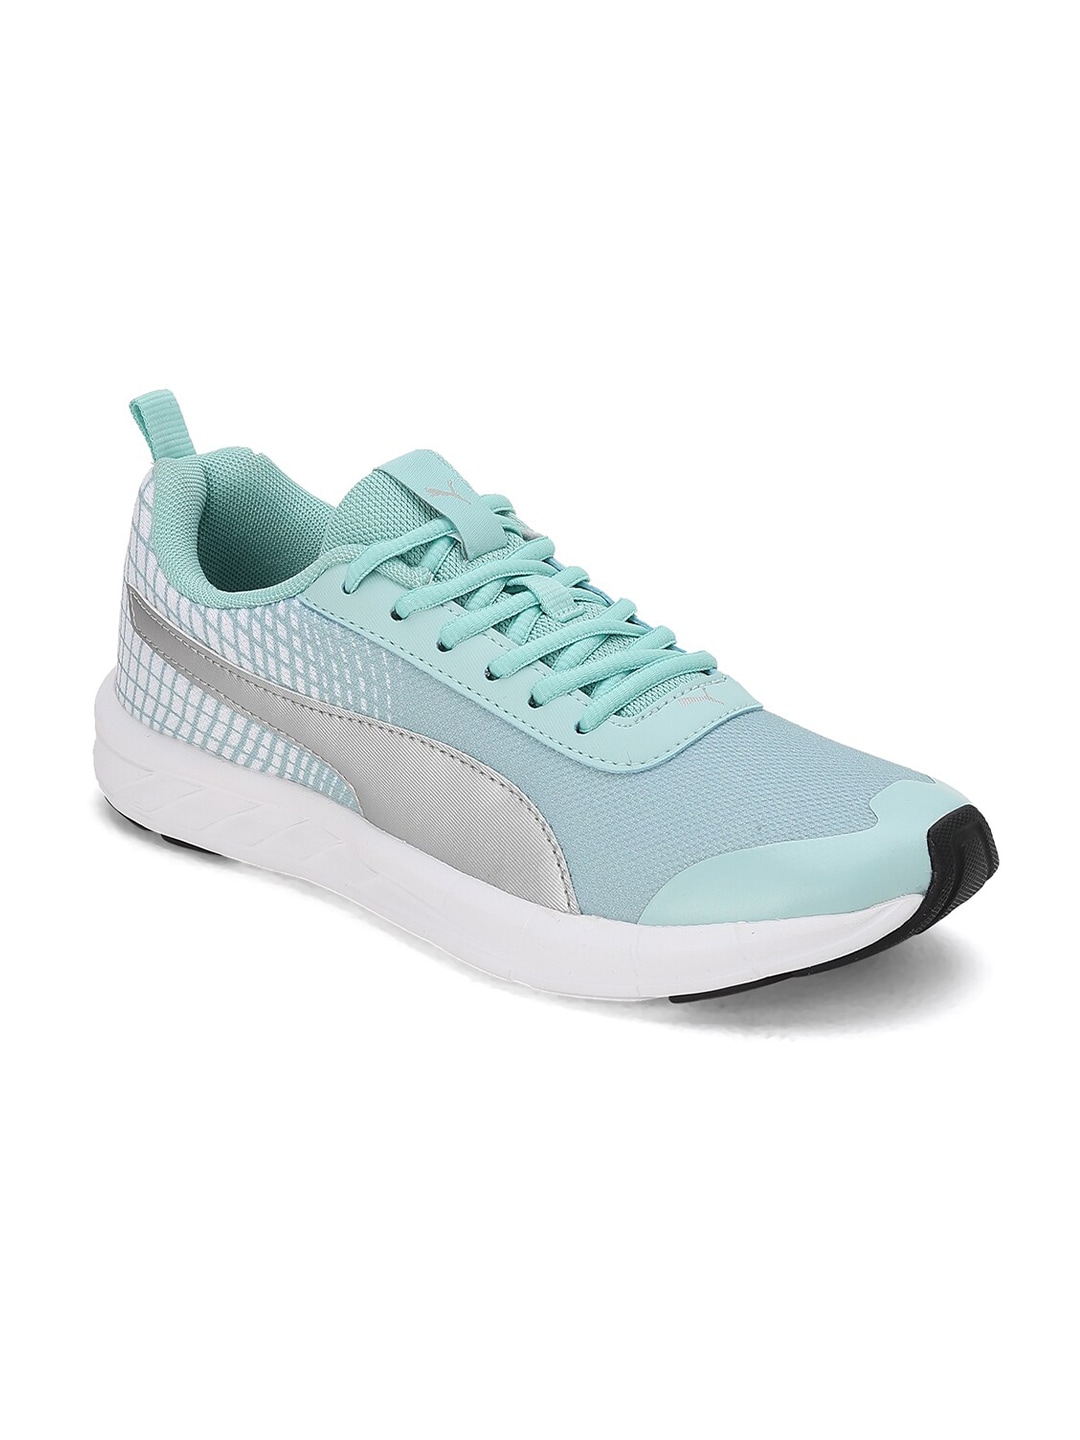 Puma Women Blue Supernal V3 Textile Running Shoes Price in India